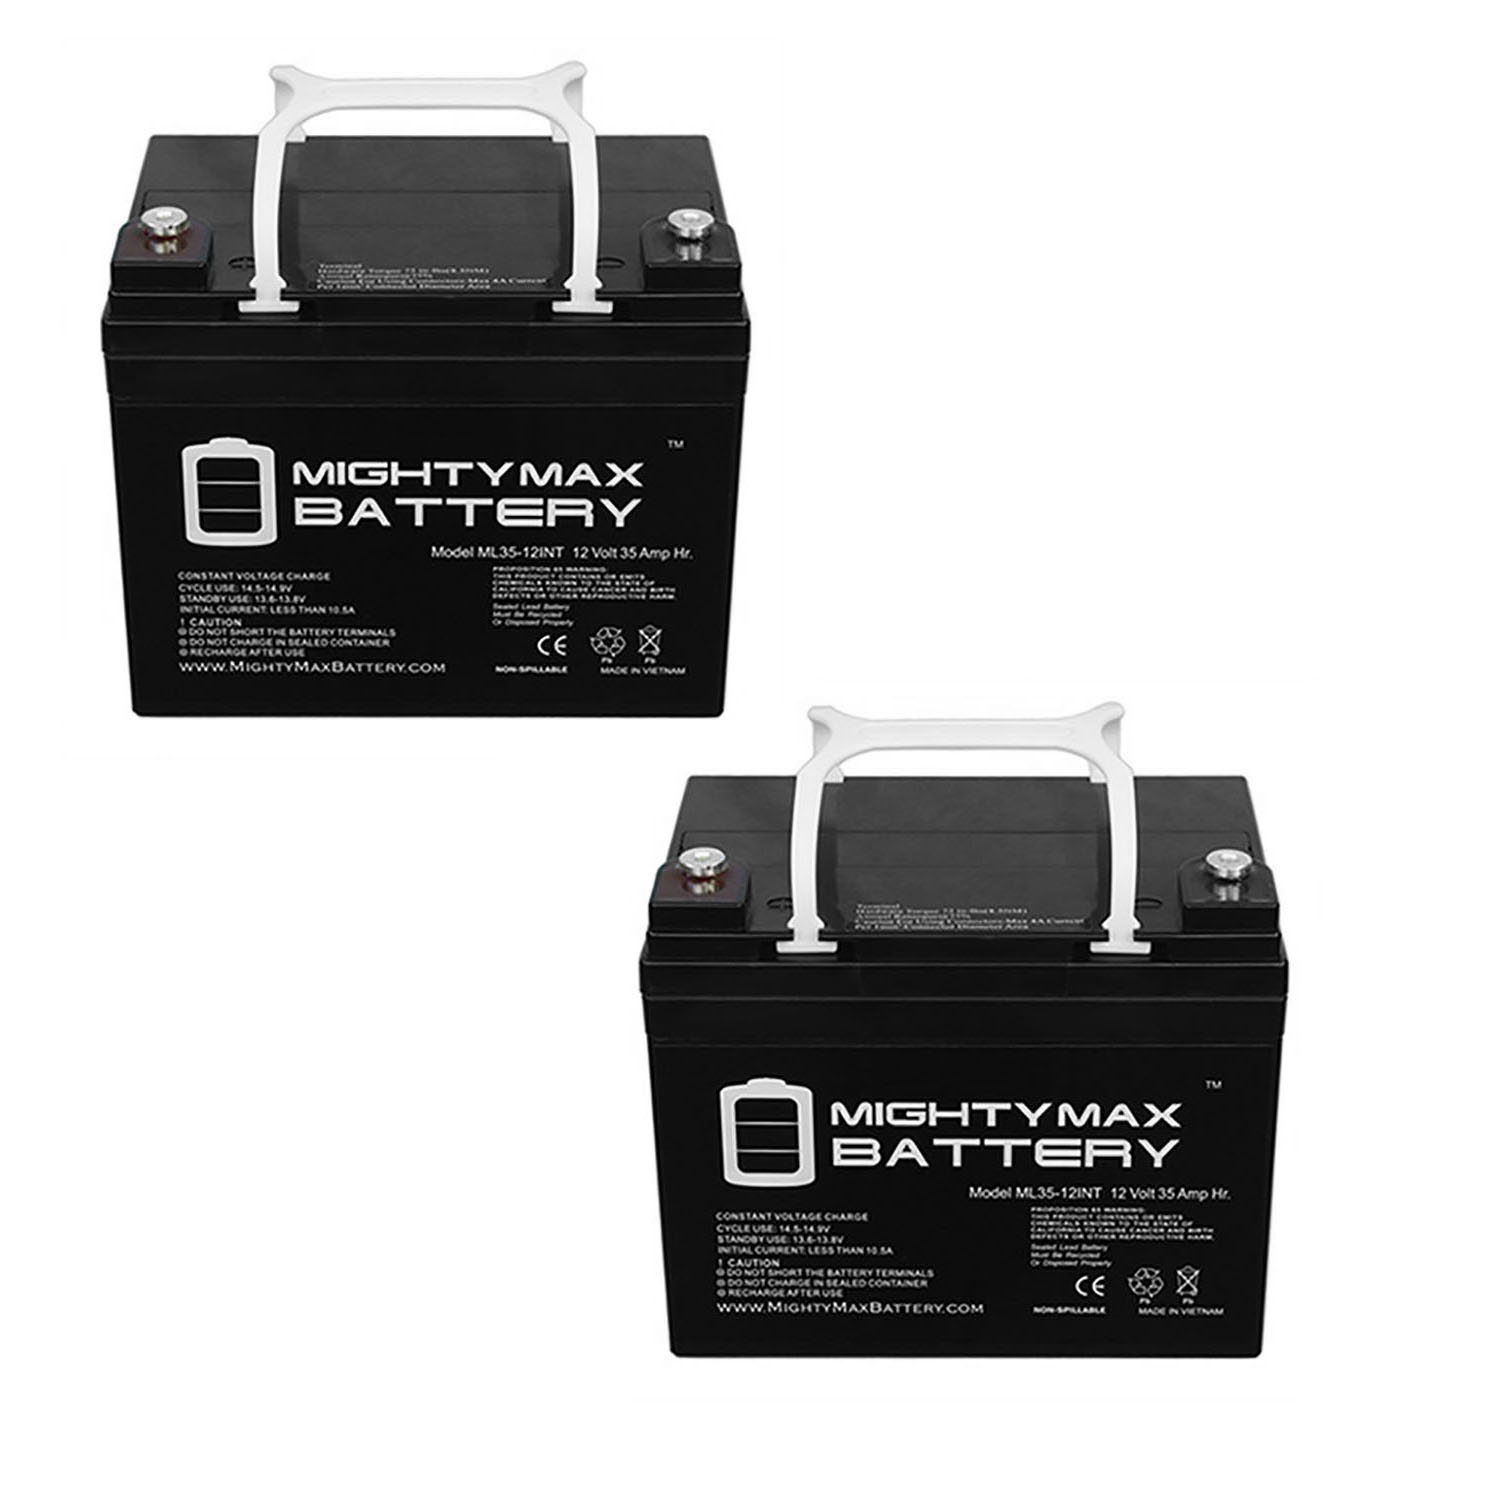 12V 35AH INT Replacement Battery for Ihc Cub Garden 108 - 2 Pack